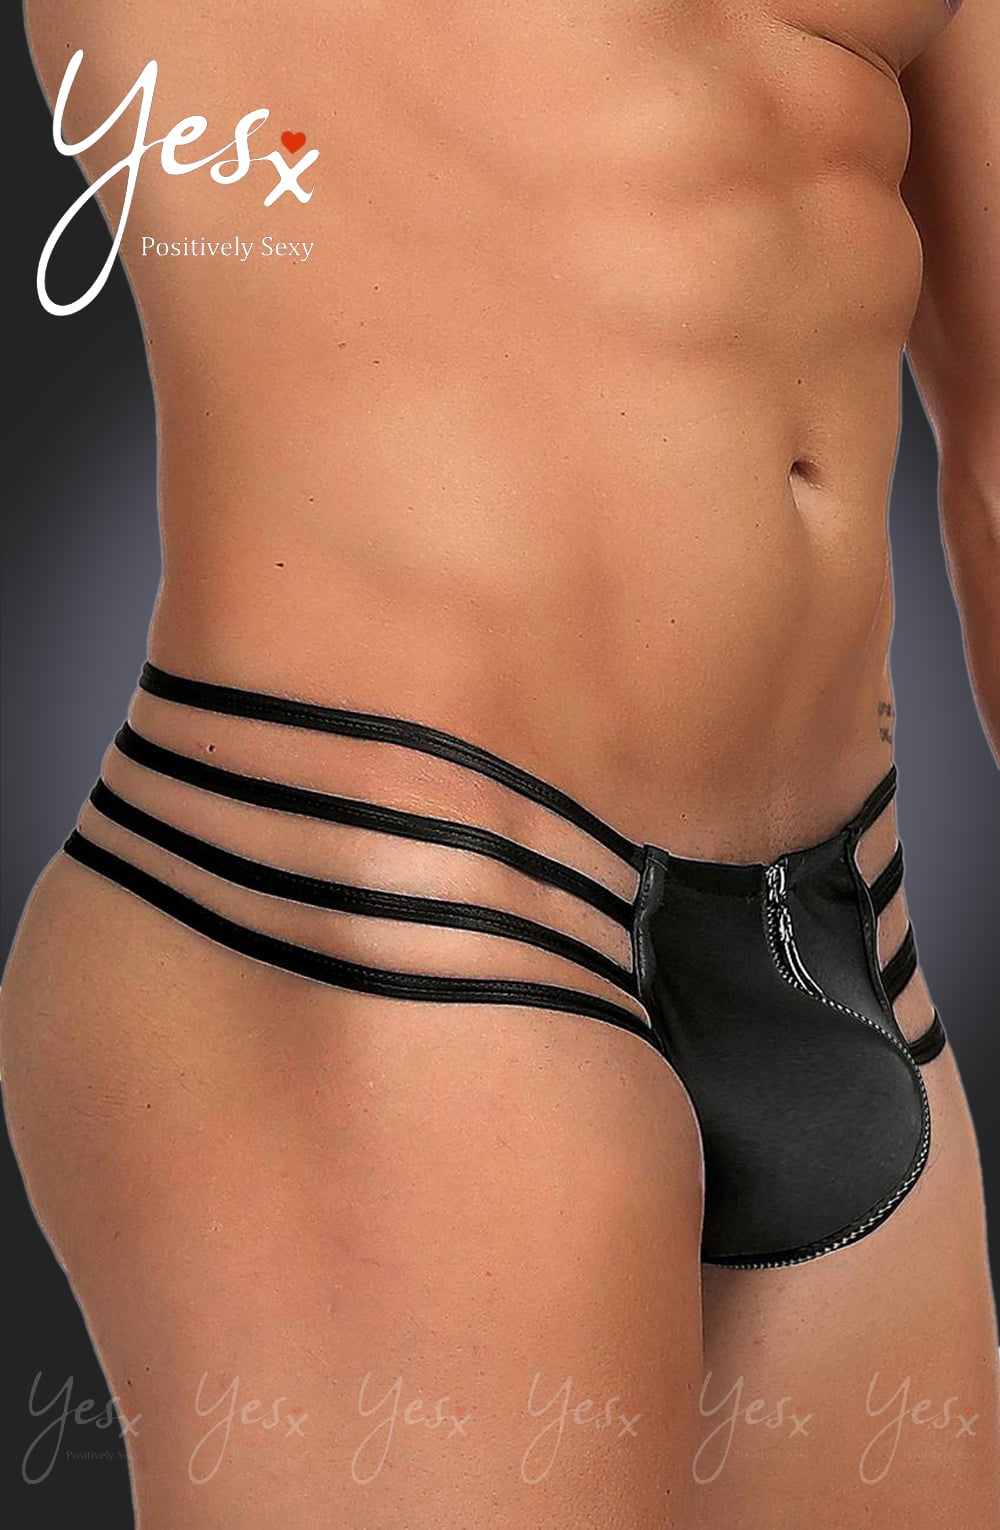 YesX YX971 Men's Thong - Black Matte Finish with Front Zip